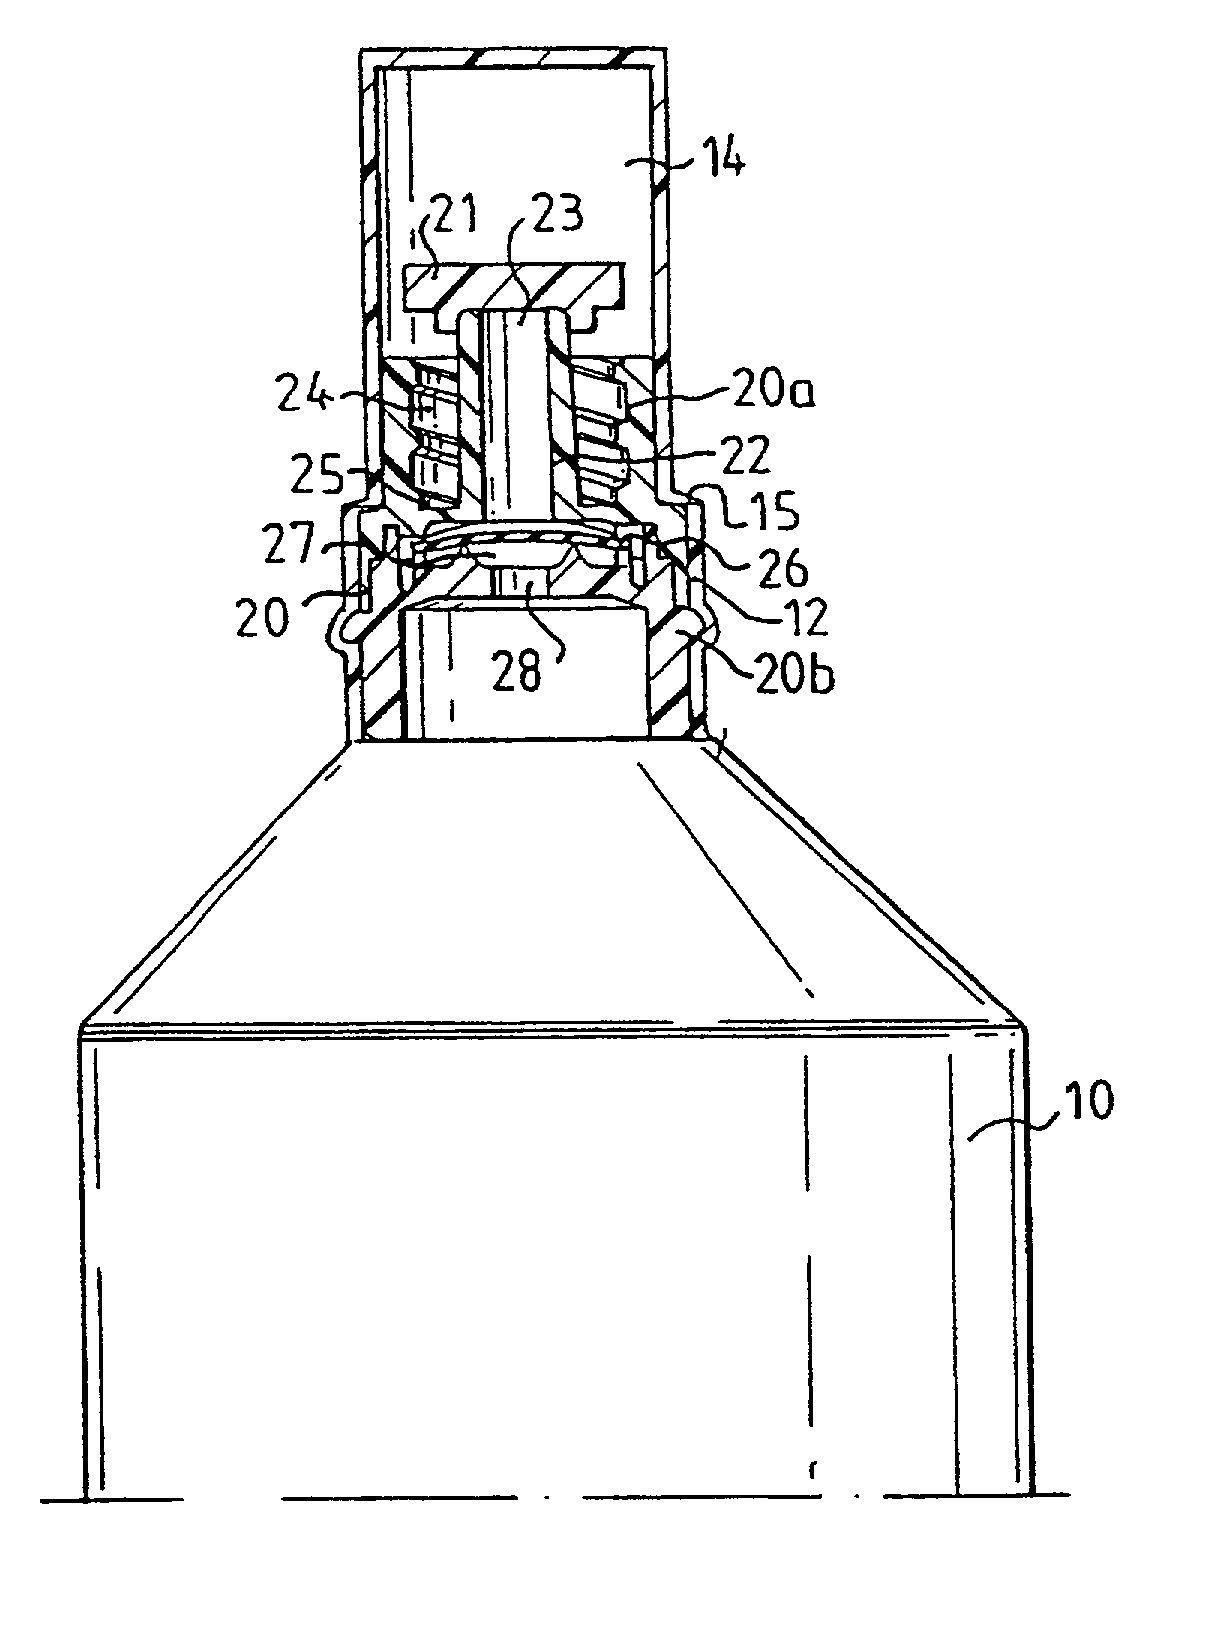 Container for intravenous administration